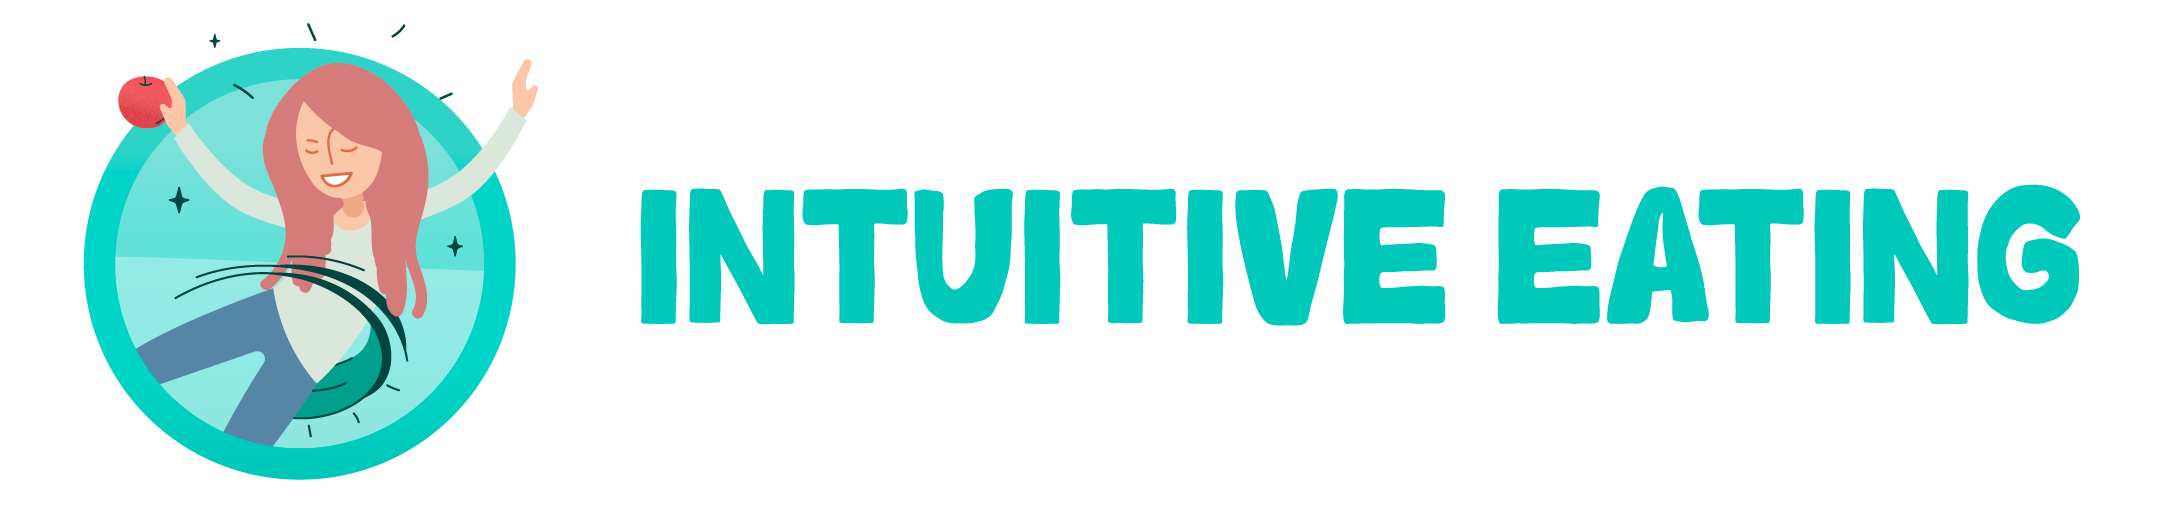 30 Days of Intuitive Eating